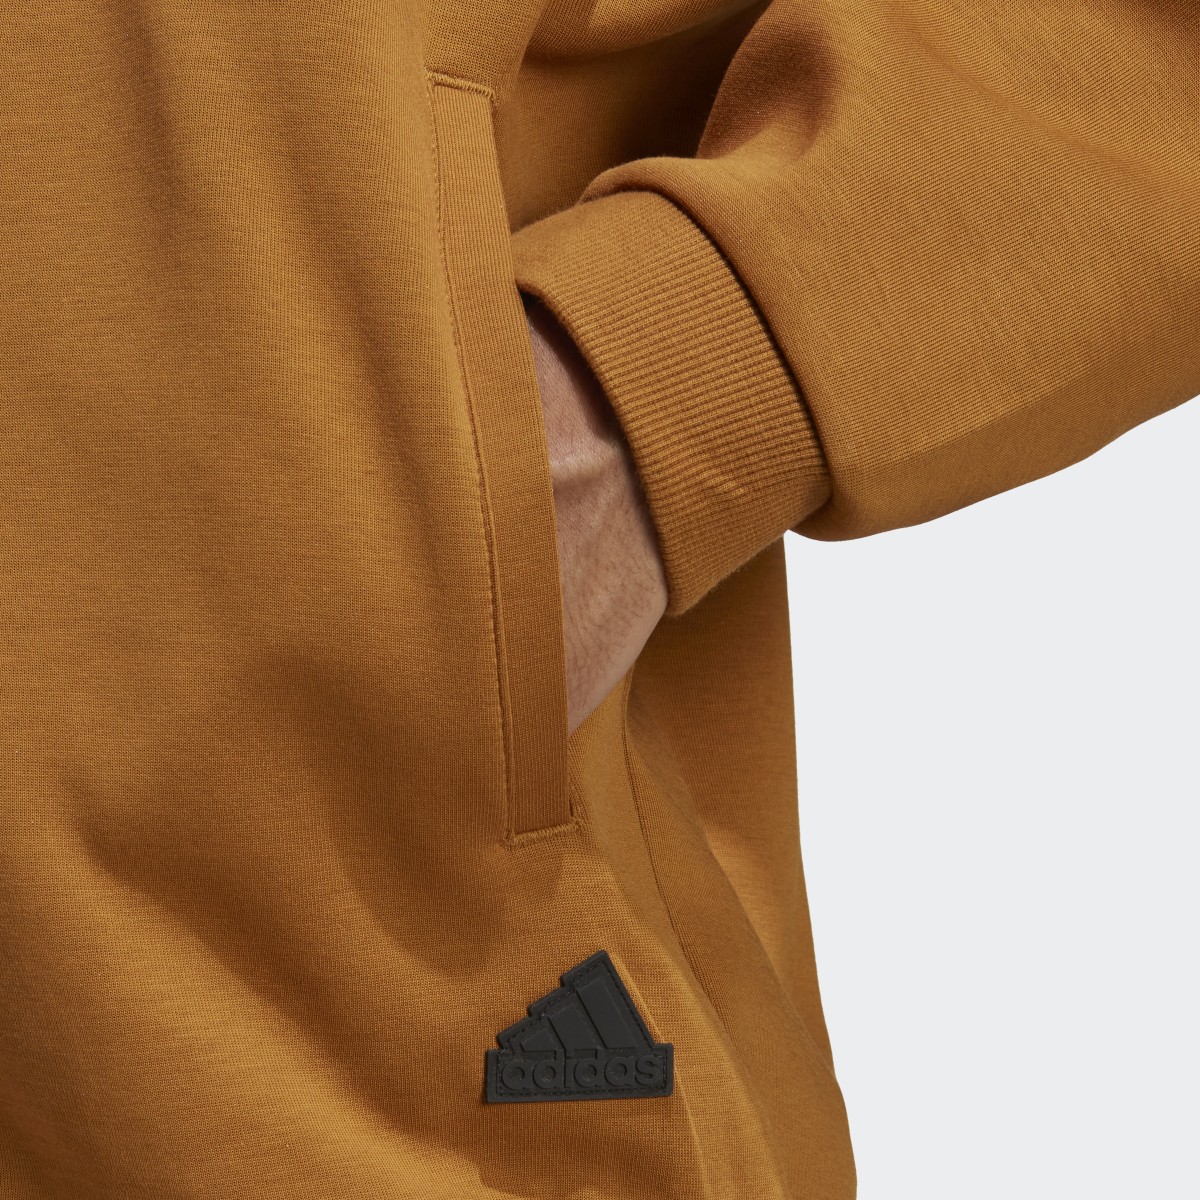 Adidas Future Icons Badge of Sport Track Top. 6